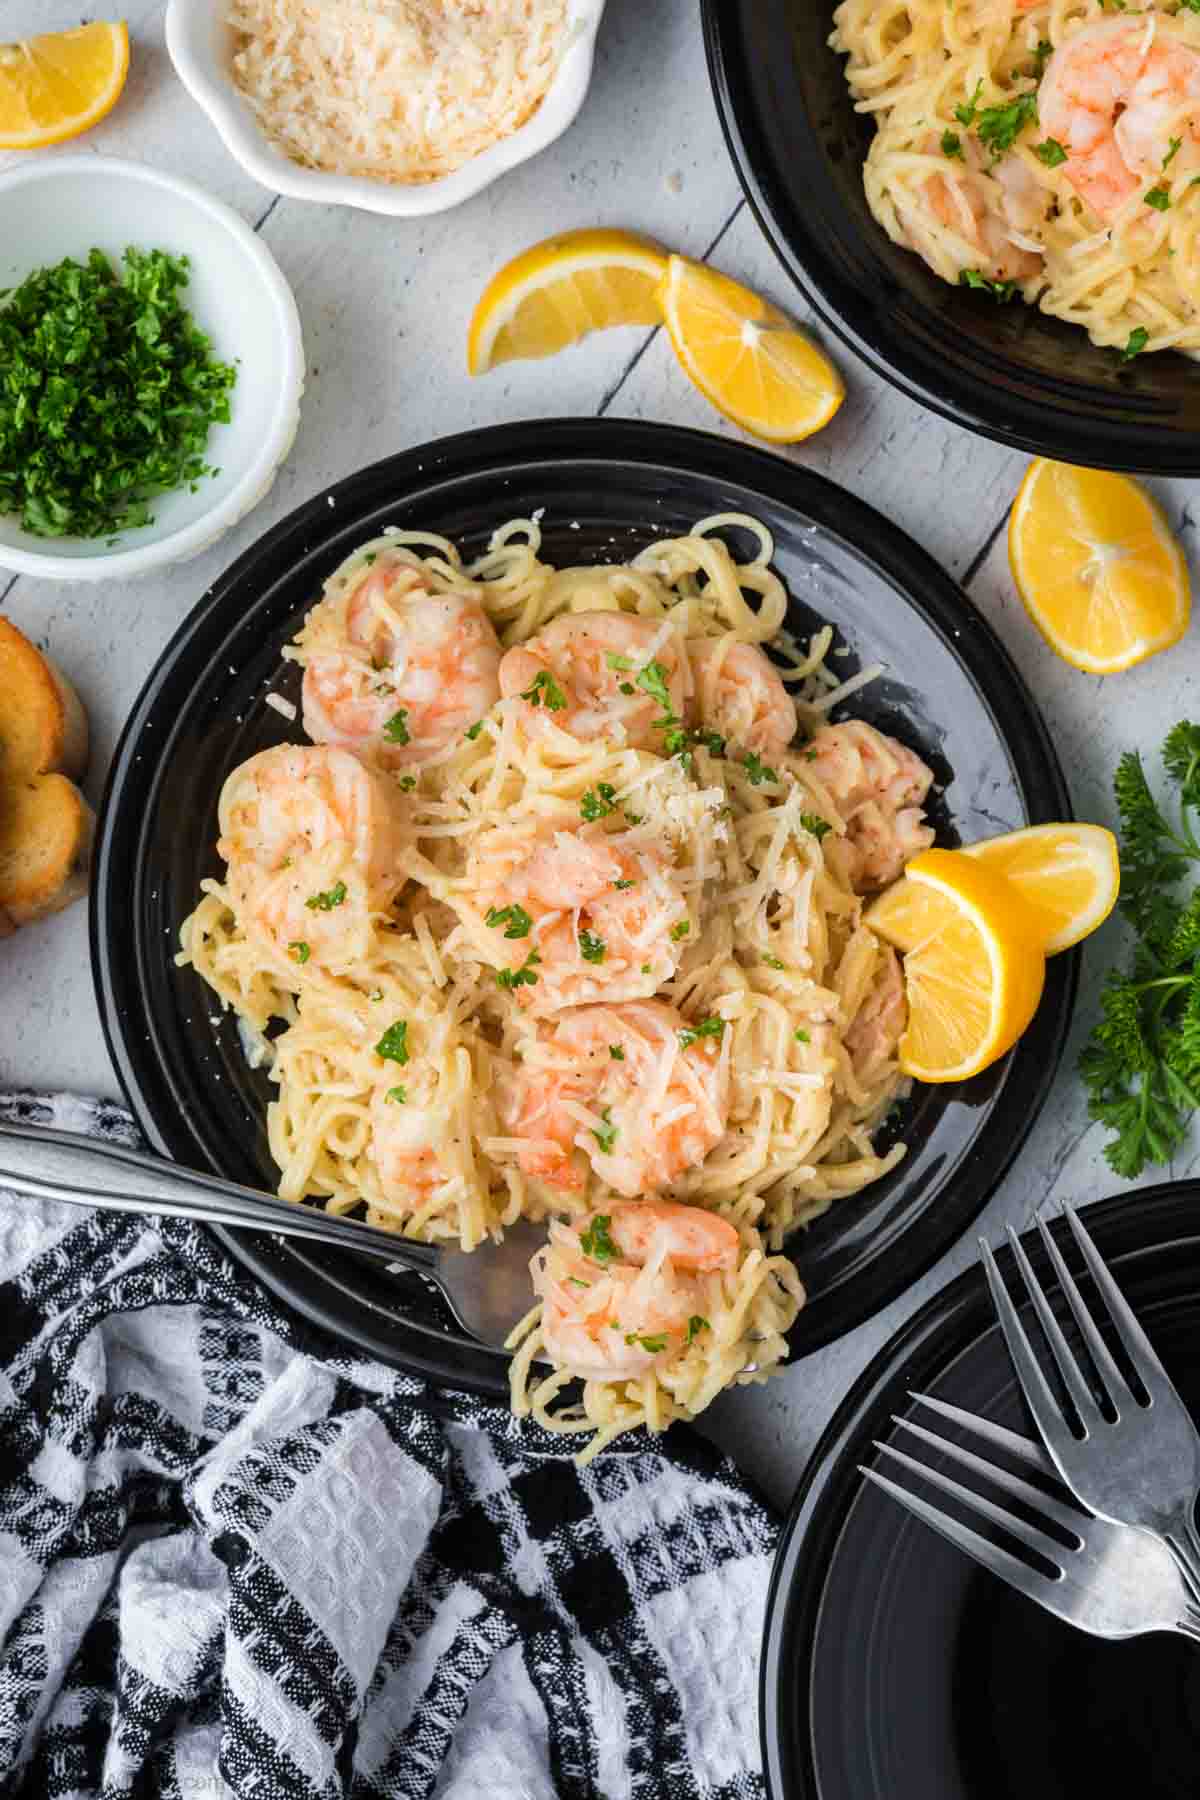 Shrimp scampi with noodles on a plate with slice of oranges